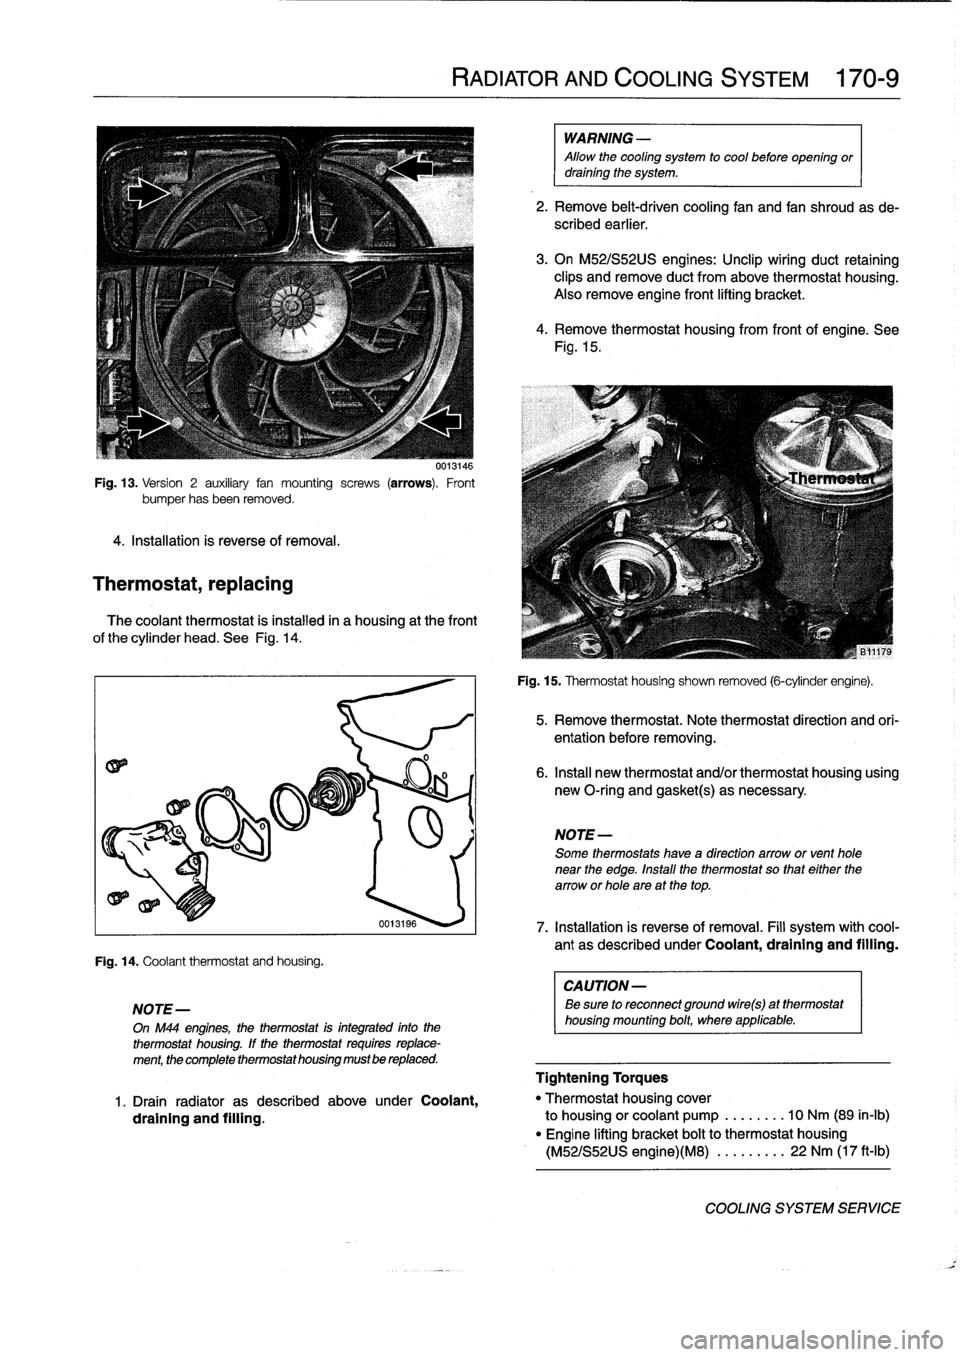 BMW 328i 1997 E36 Workshop Manual 
Fig
.
13
.
Version
2
auxiliary
fan
mounting
screws
(arrows)
.
Front
bumper
hasbeen
removed
.

4
.
Installation
is
reverse
of
removal
.

Thermostat,
replacing

0013146

The
coolant
thermostat
is
insta